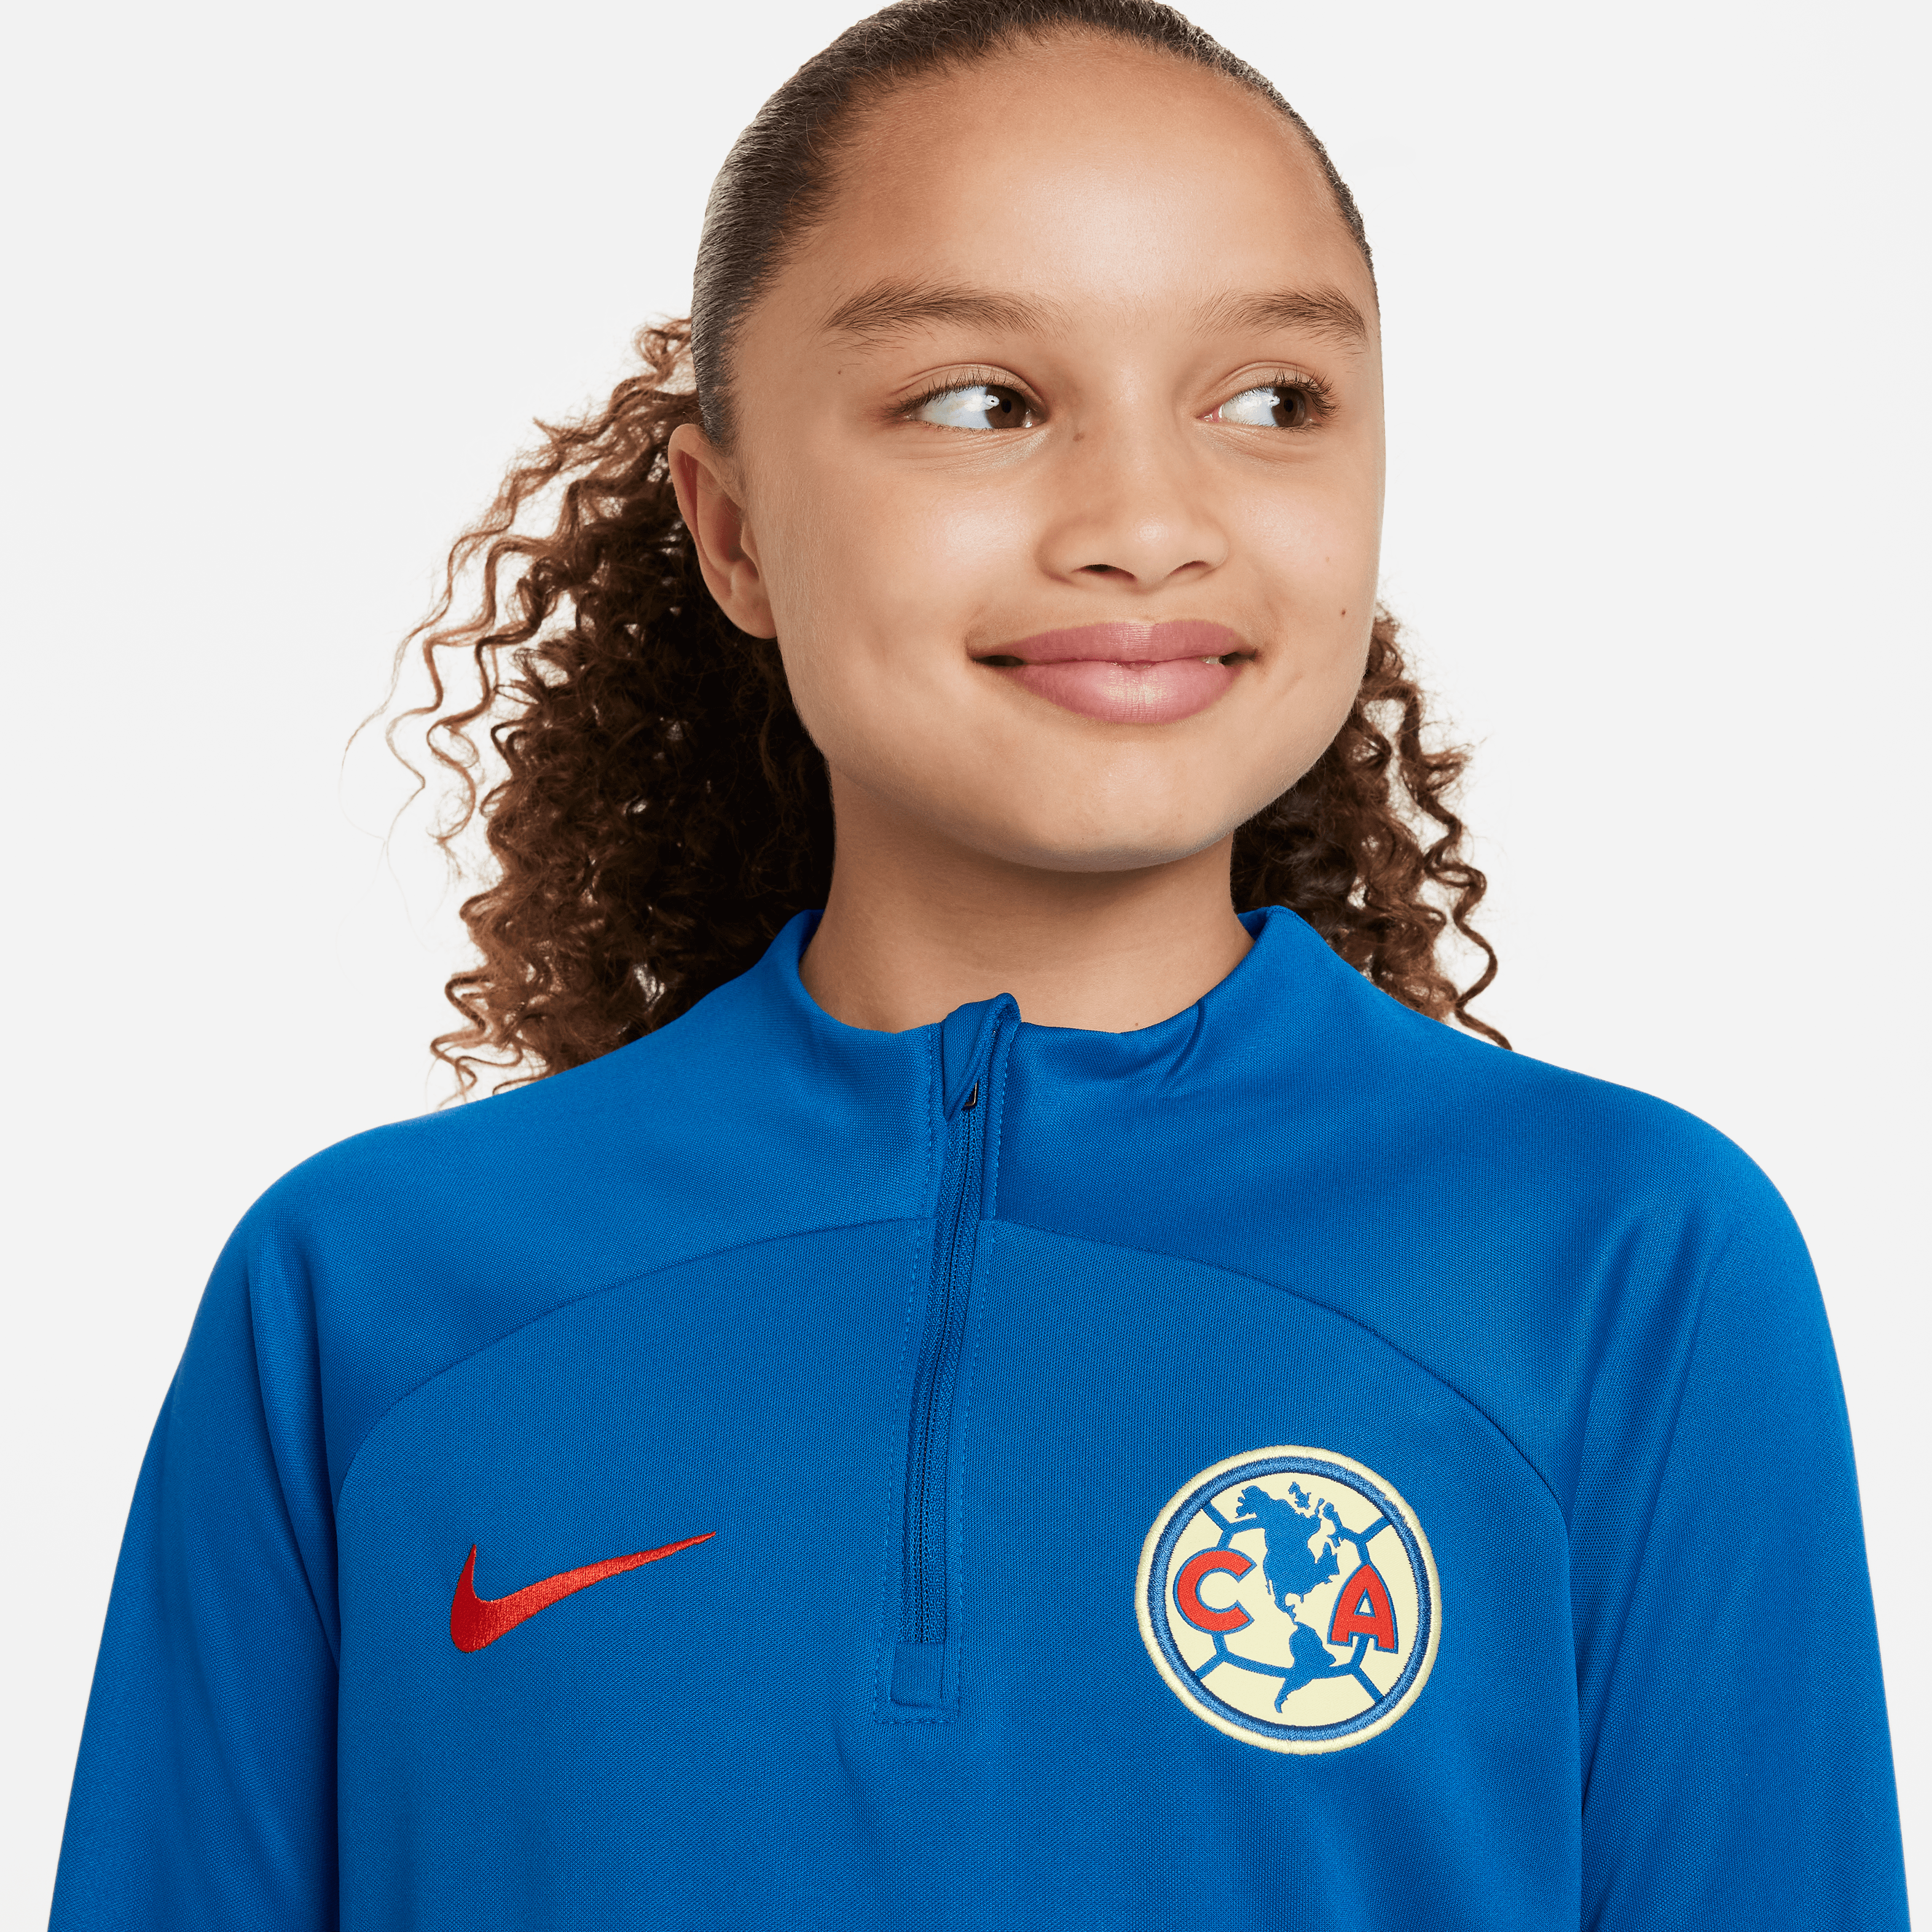 Nike Youth Club América Academy Pro Dri-FIT Soccer Drill Top